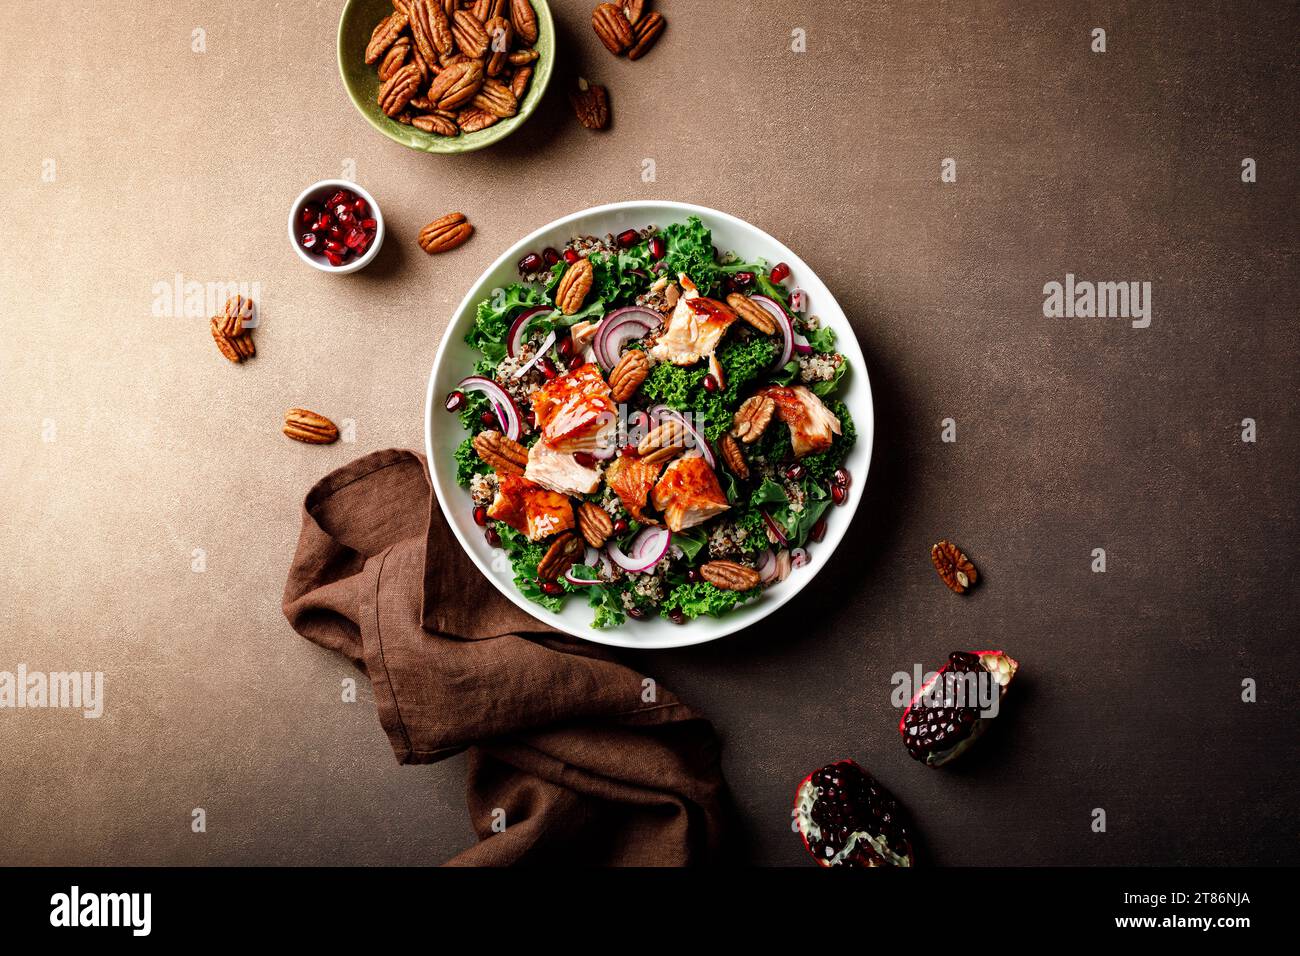 Salmon superfood salad with grilled fish, kale, quinoa, pecan nuts, red onion and pomegranate. Top view Stock Photo